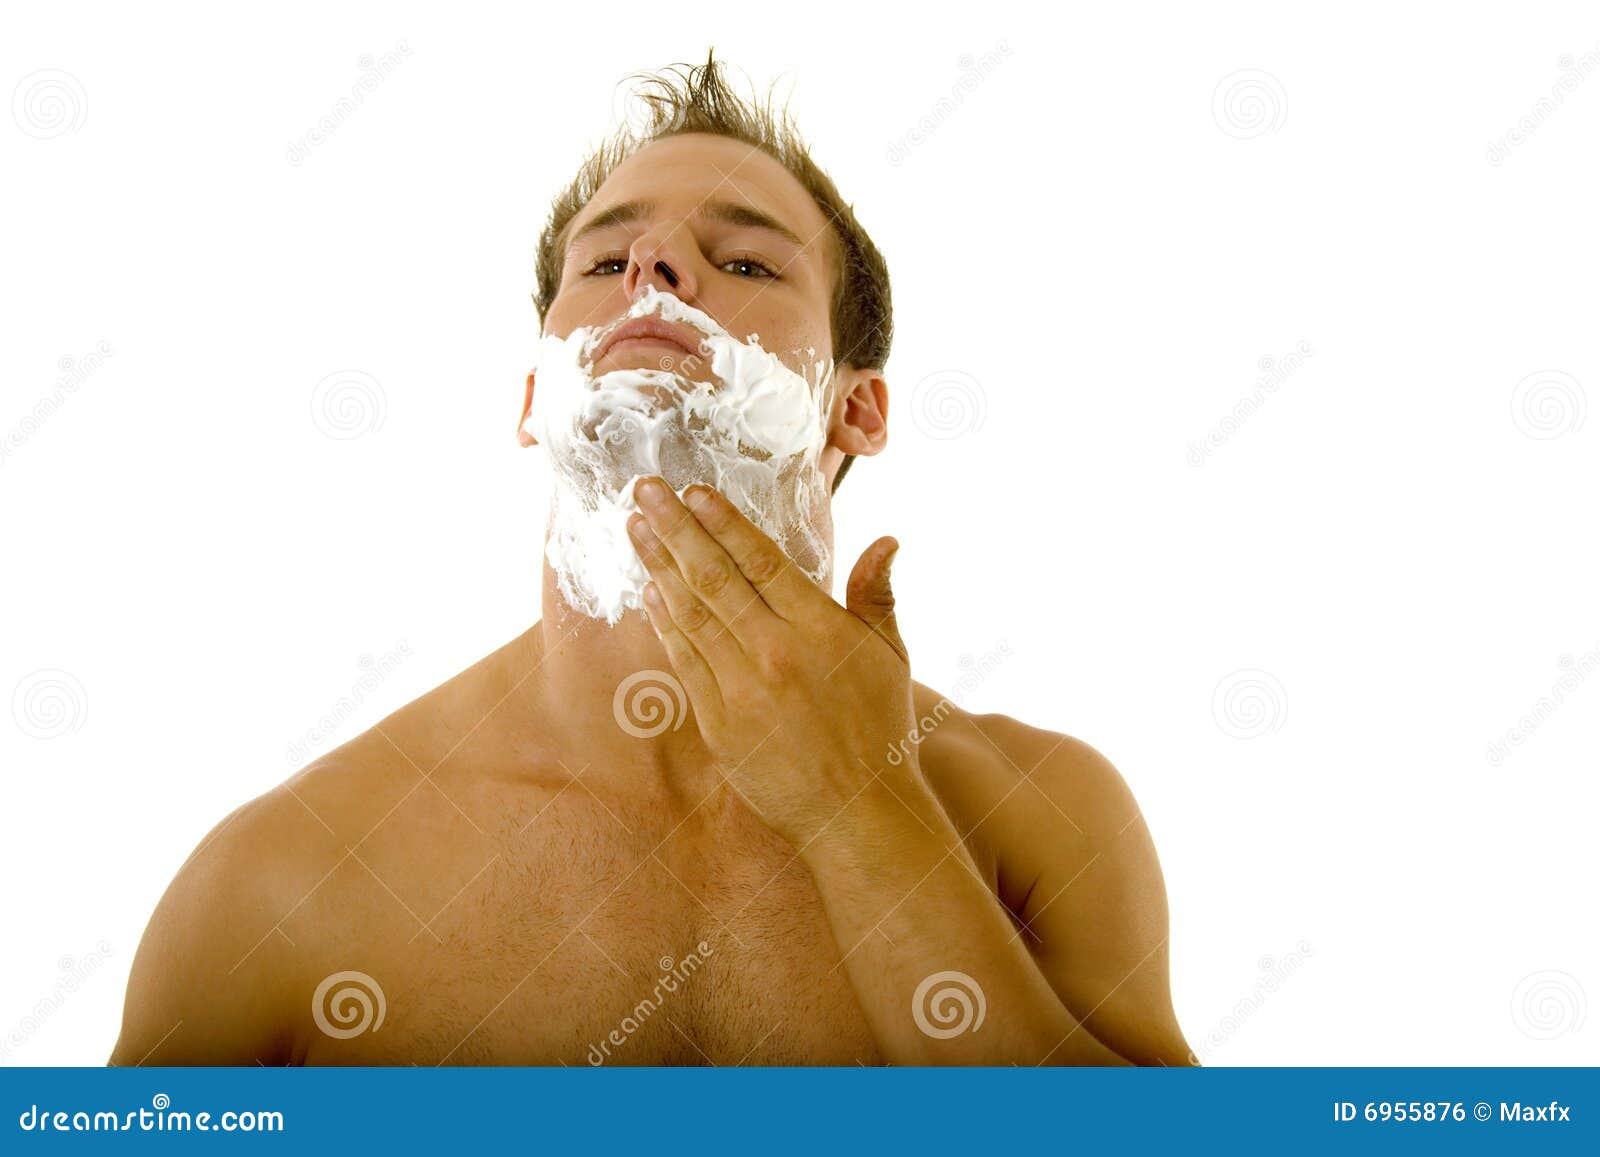 Young Man Applying Shaving Cream To His Face Royalty Free Stock Image